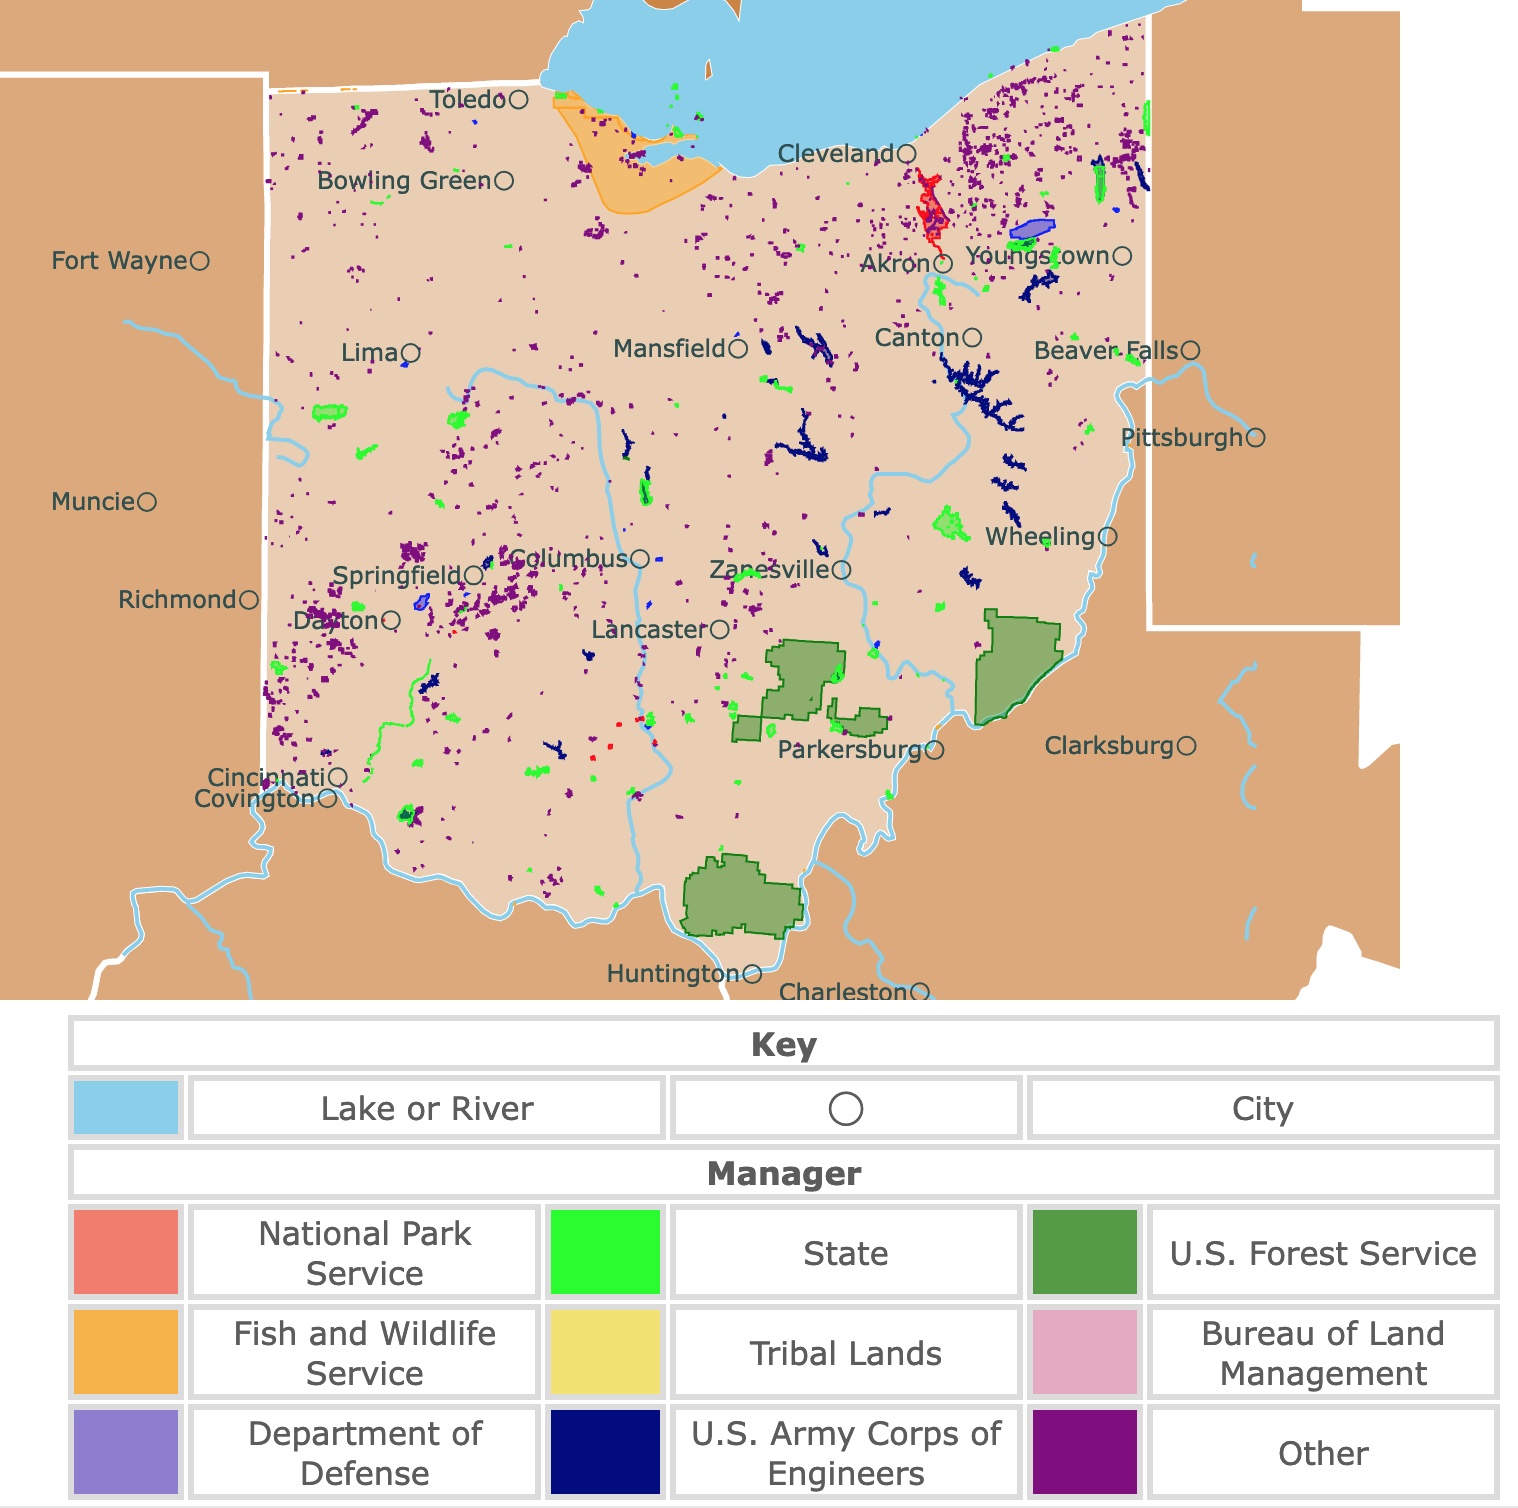 Map of Ohio's state parks, national parks, forests, and public lands areas